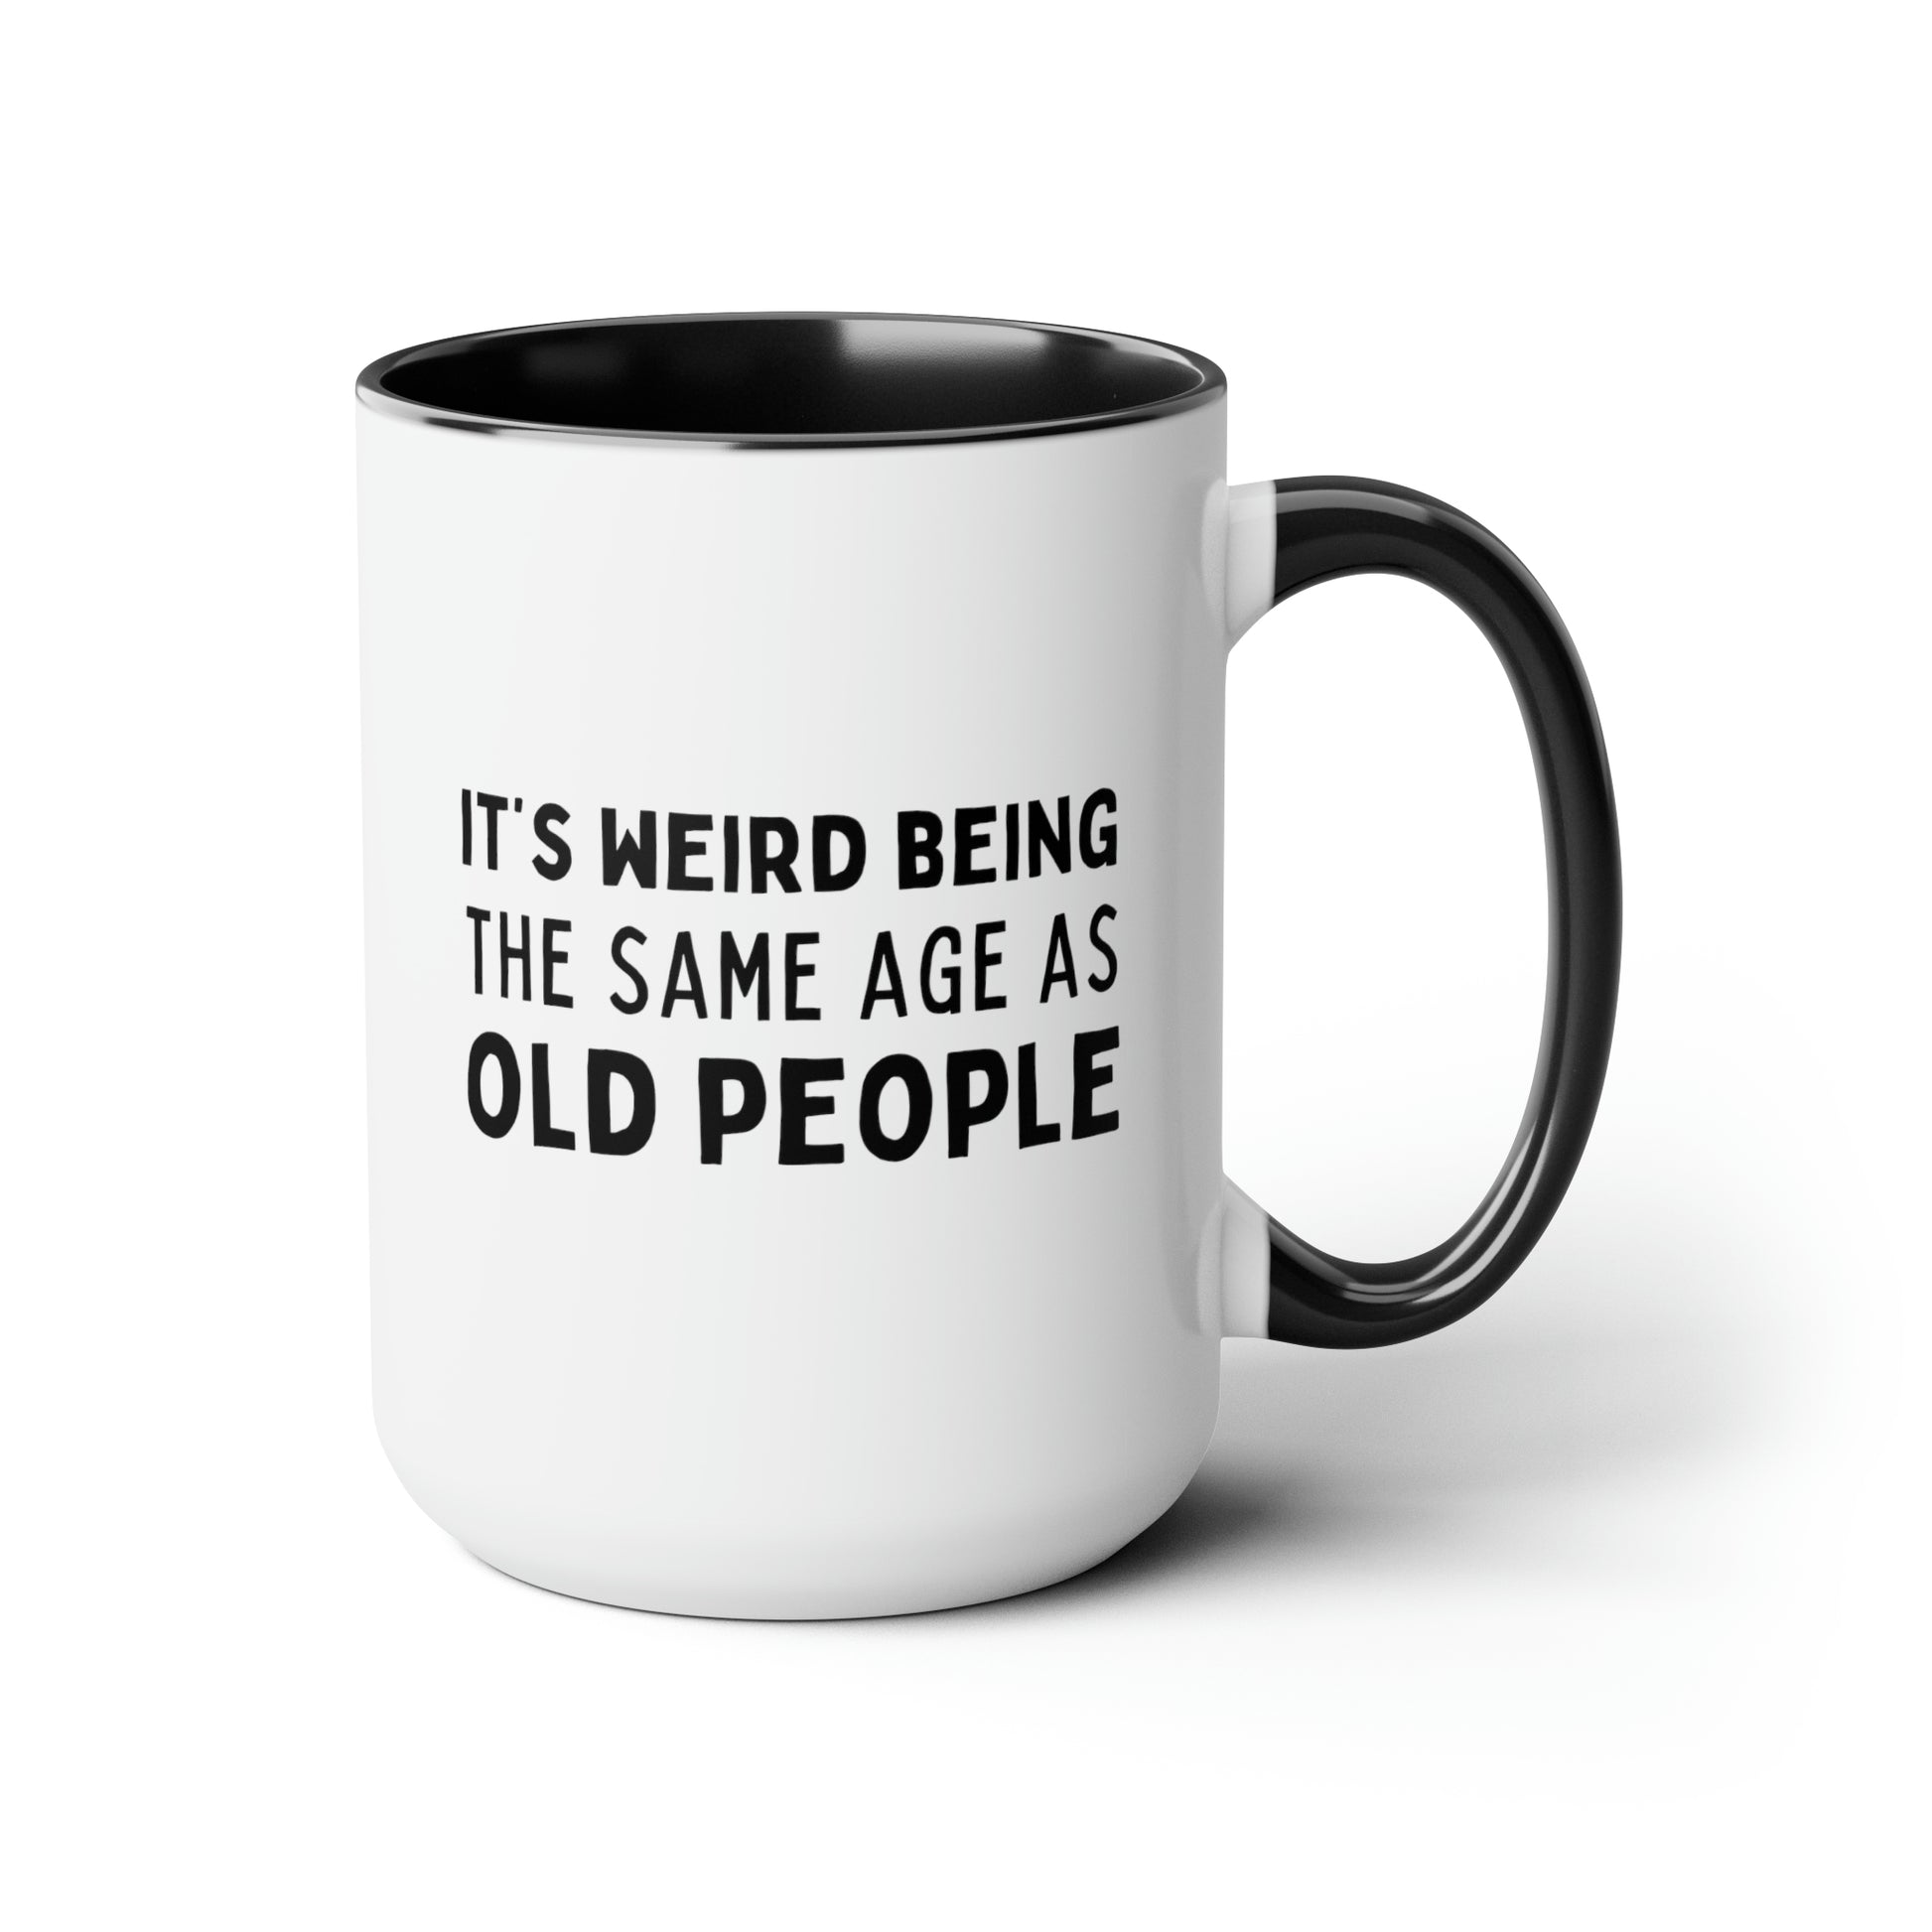 Its Weird Being The Same Age As Old People 15oz white with black accent funny large coffee mug gift dad  mom grandma grandpa mum birthday waveywares wavey wares wavywares wavy wares